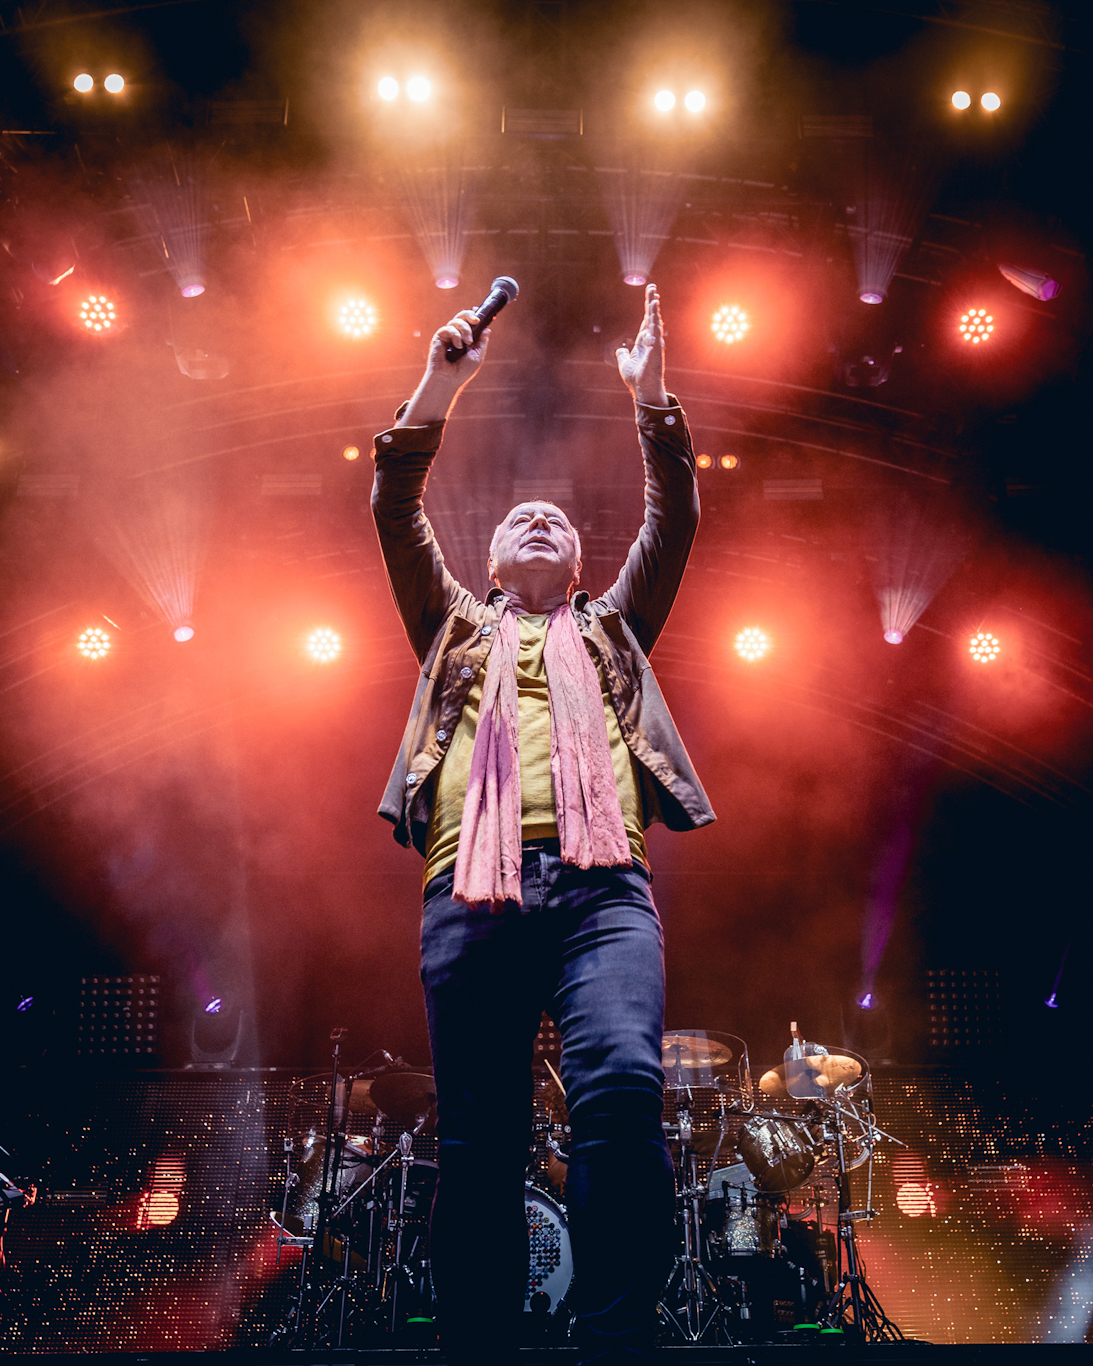 LIVE REVIEW: Simple Minds at Custom House Square, Belfast, Northern Ireland